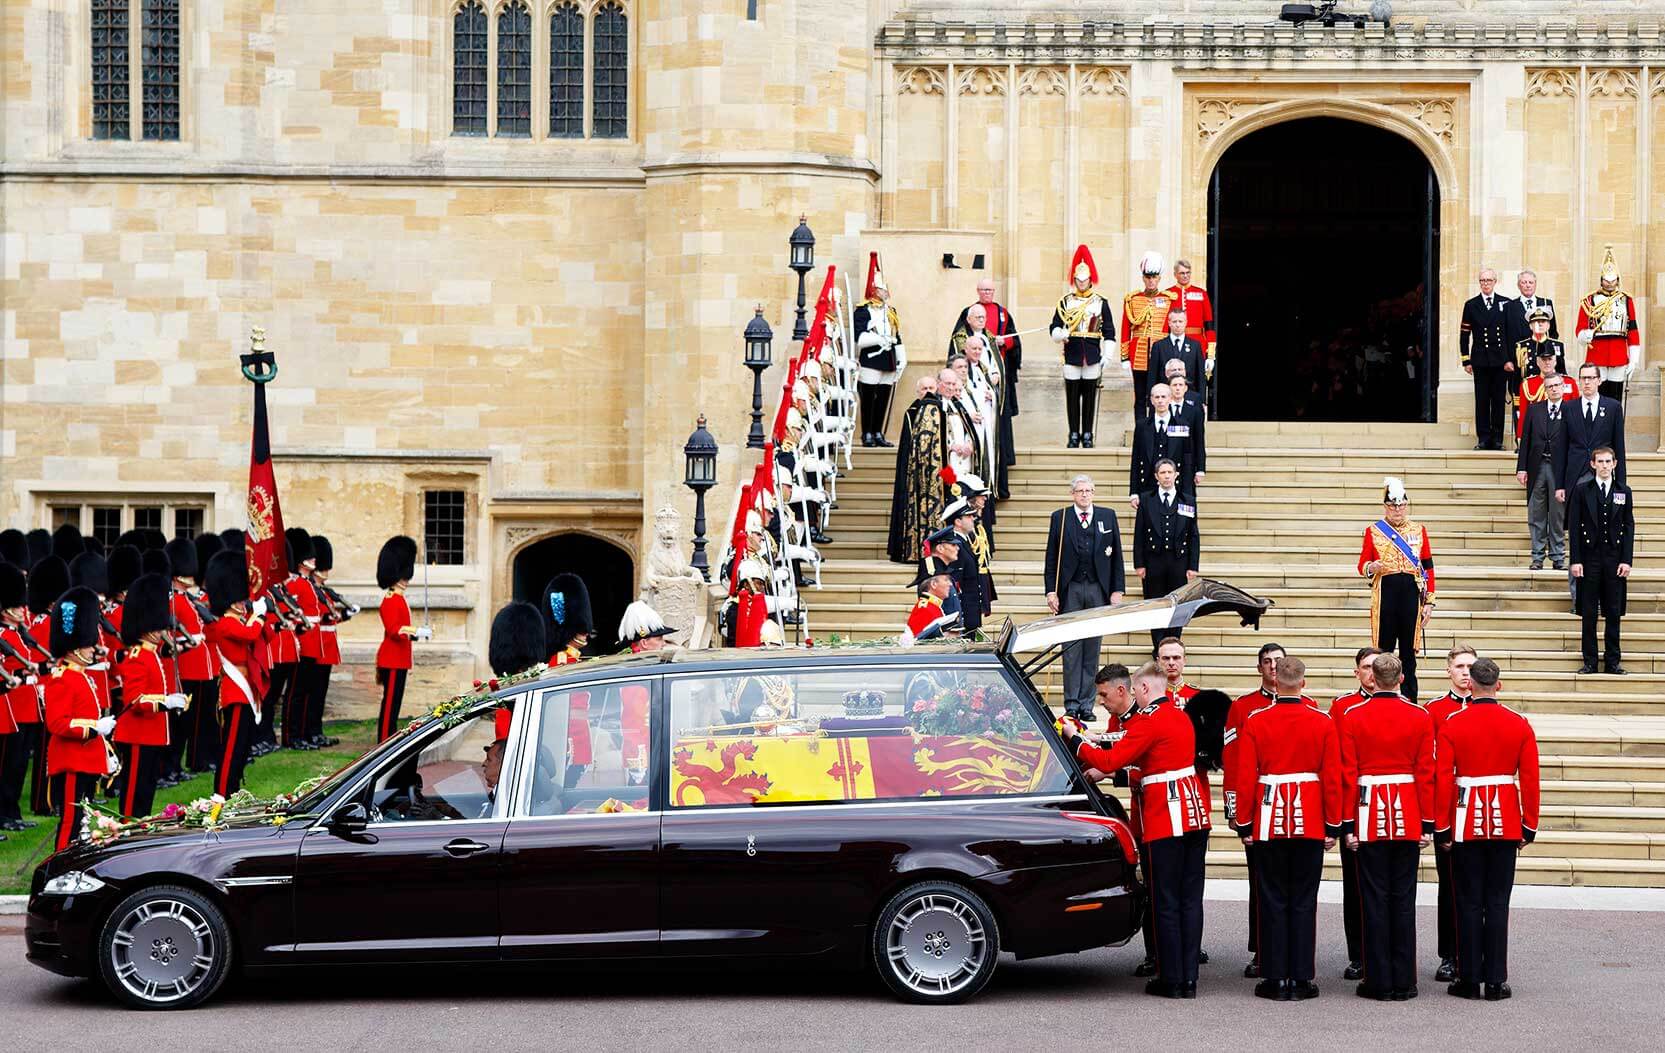 The Bearer Party remove the Queen's coffin from the hearse